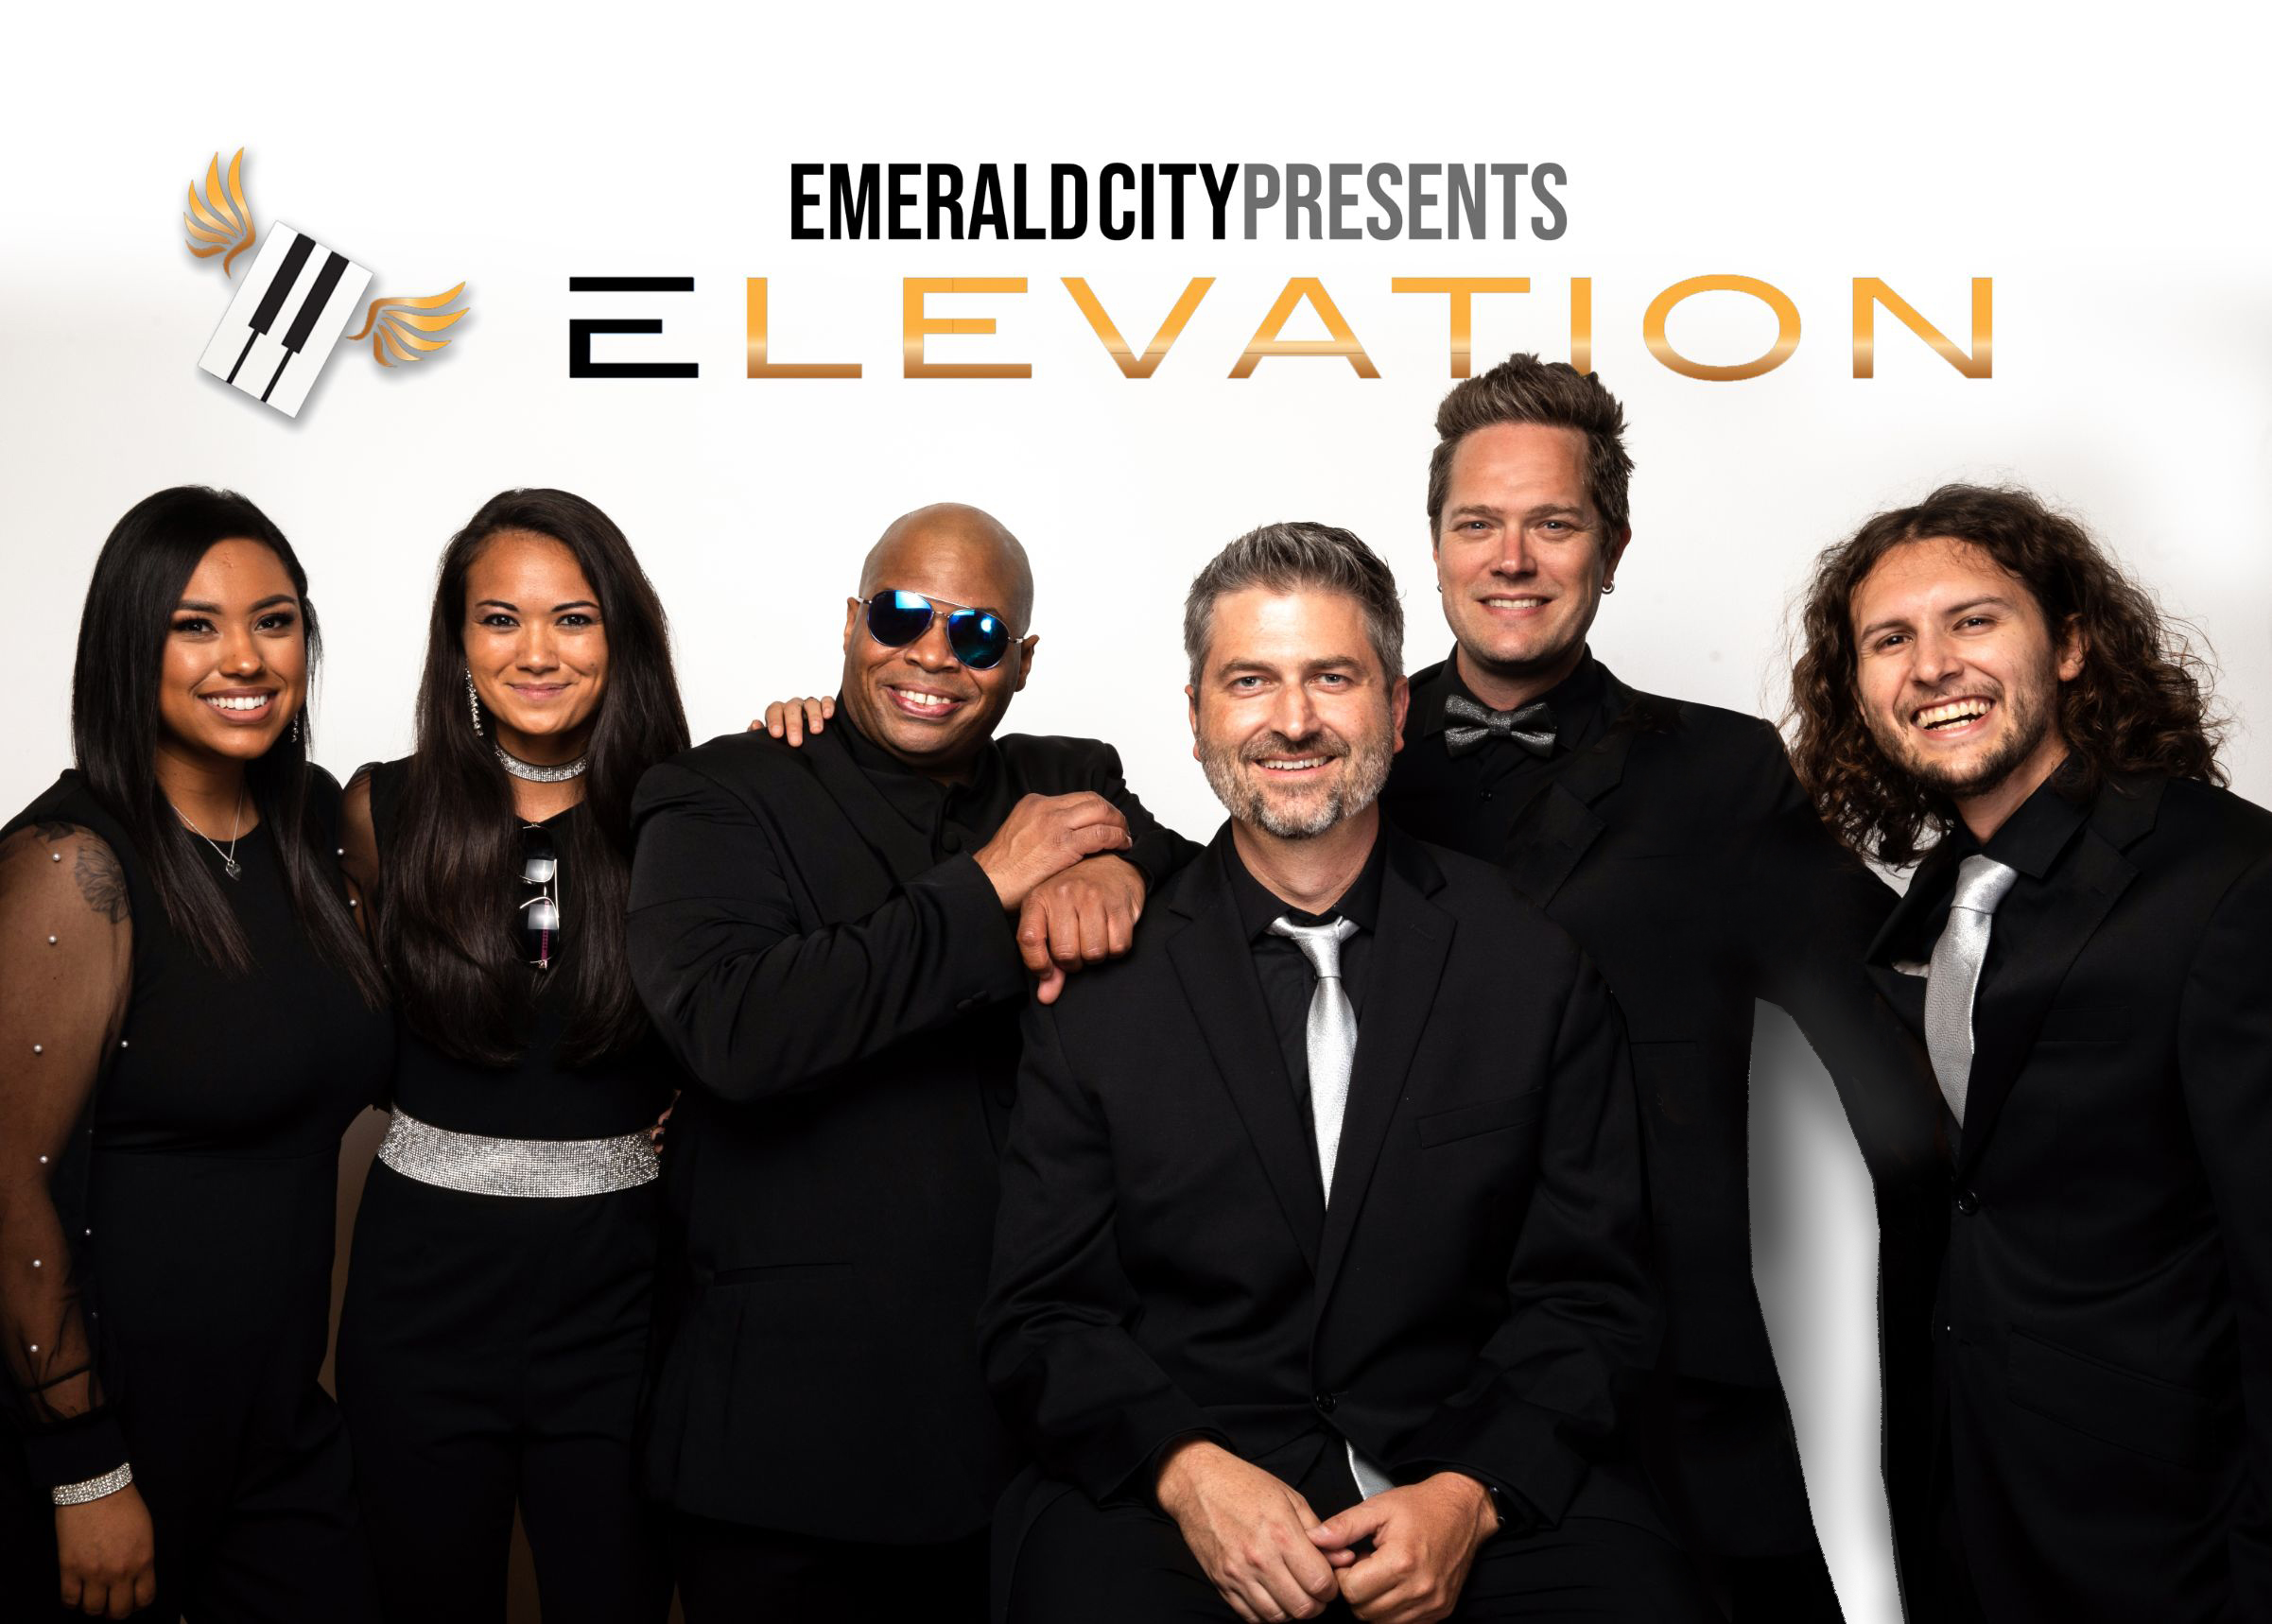 Elevation Band - One of the Best Party Bands in the U.S. | Emerald City Bands